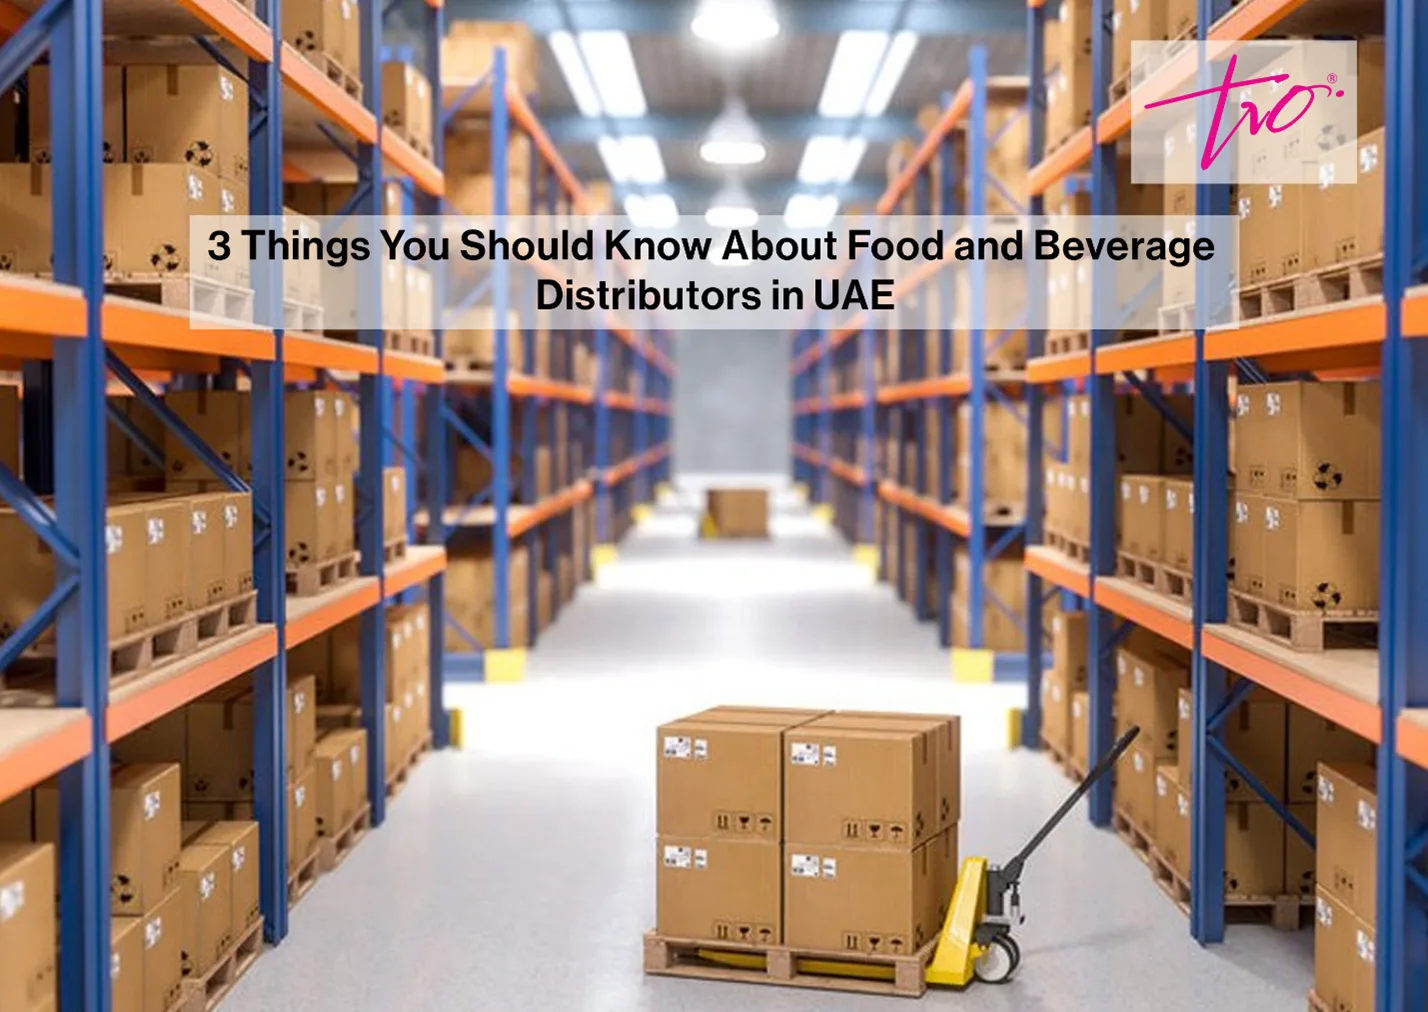 3 Things You Should Know About Food and Beverage Distributors in UAE